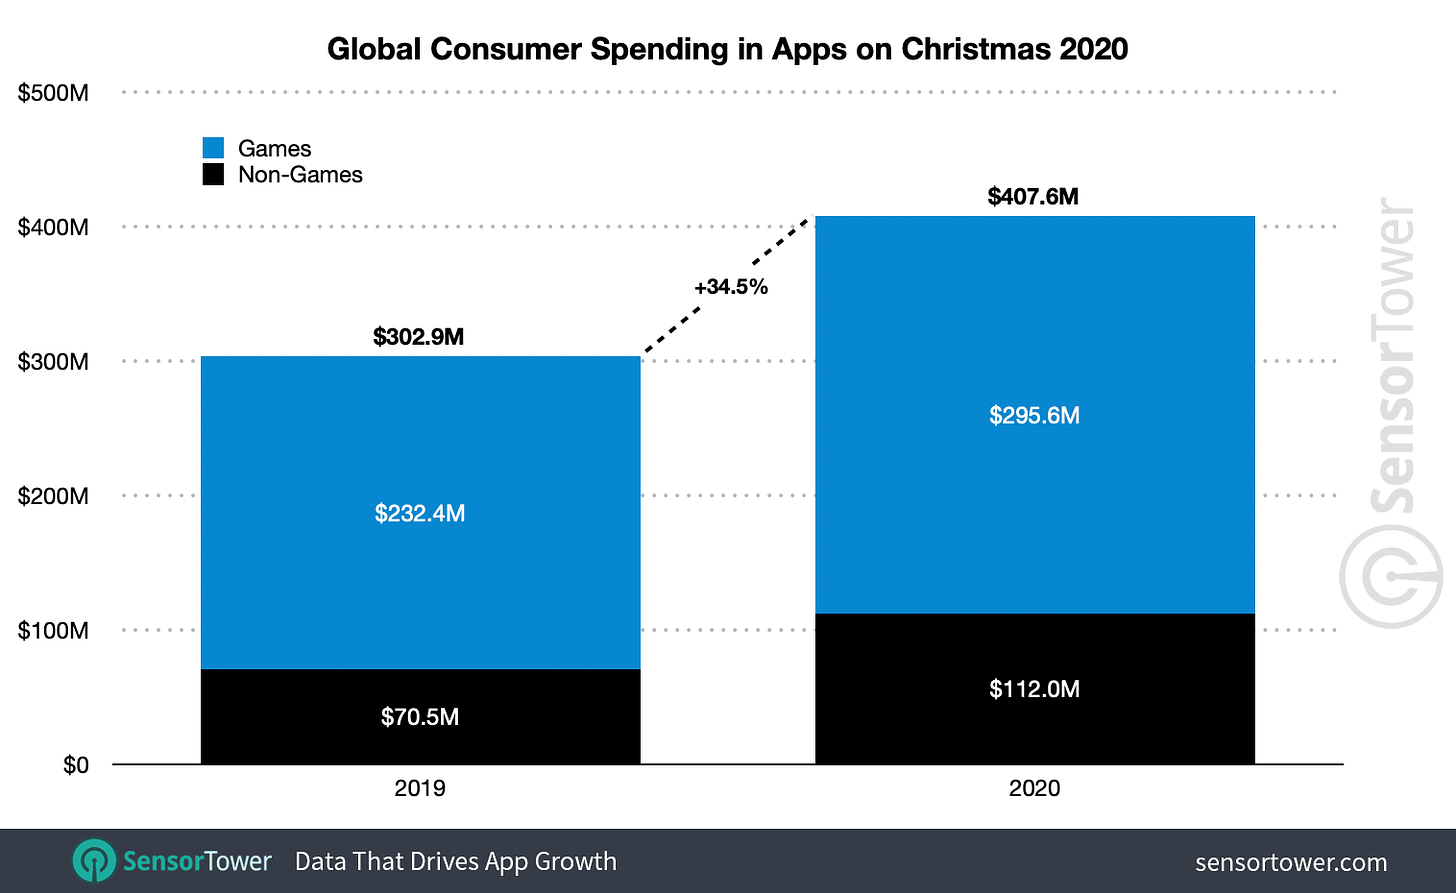 Global consumer spending on mobile apps this Christmas grew 34.5 percent year-over-year to $407.6 million.